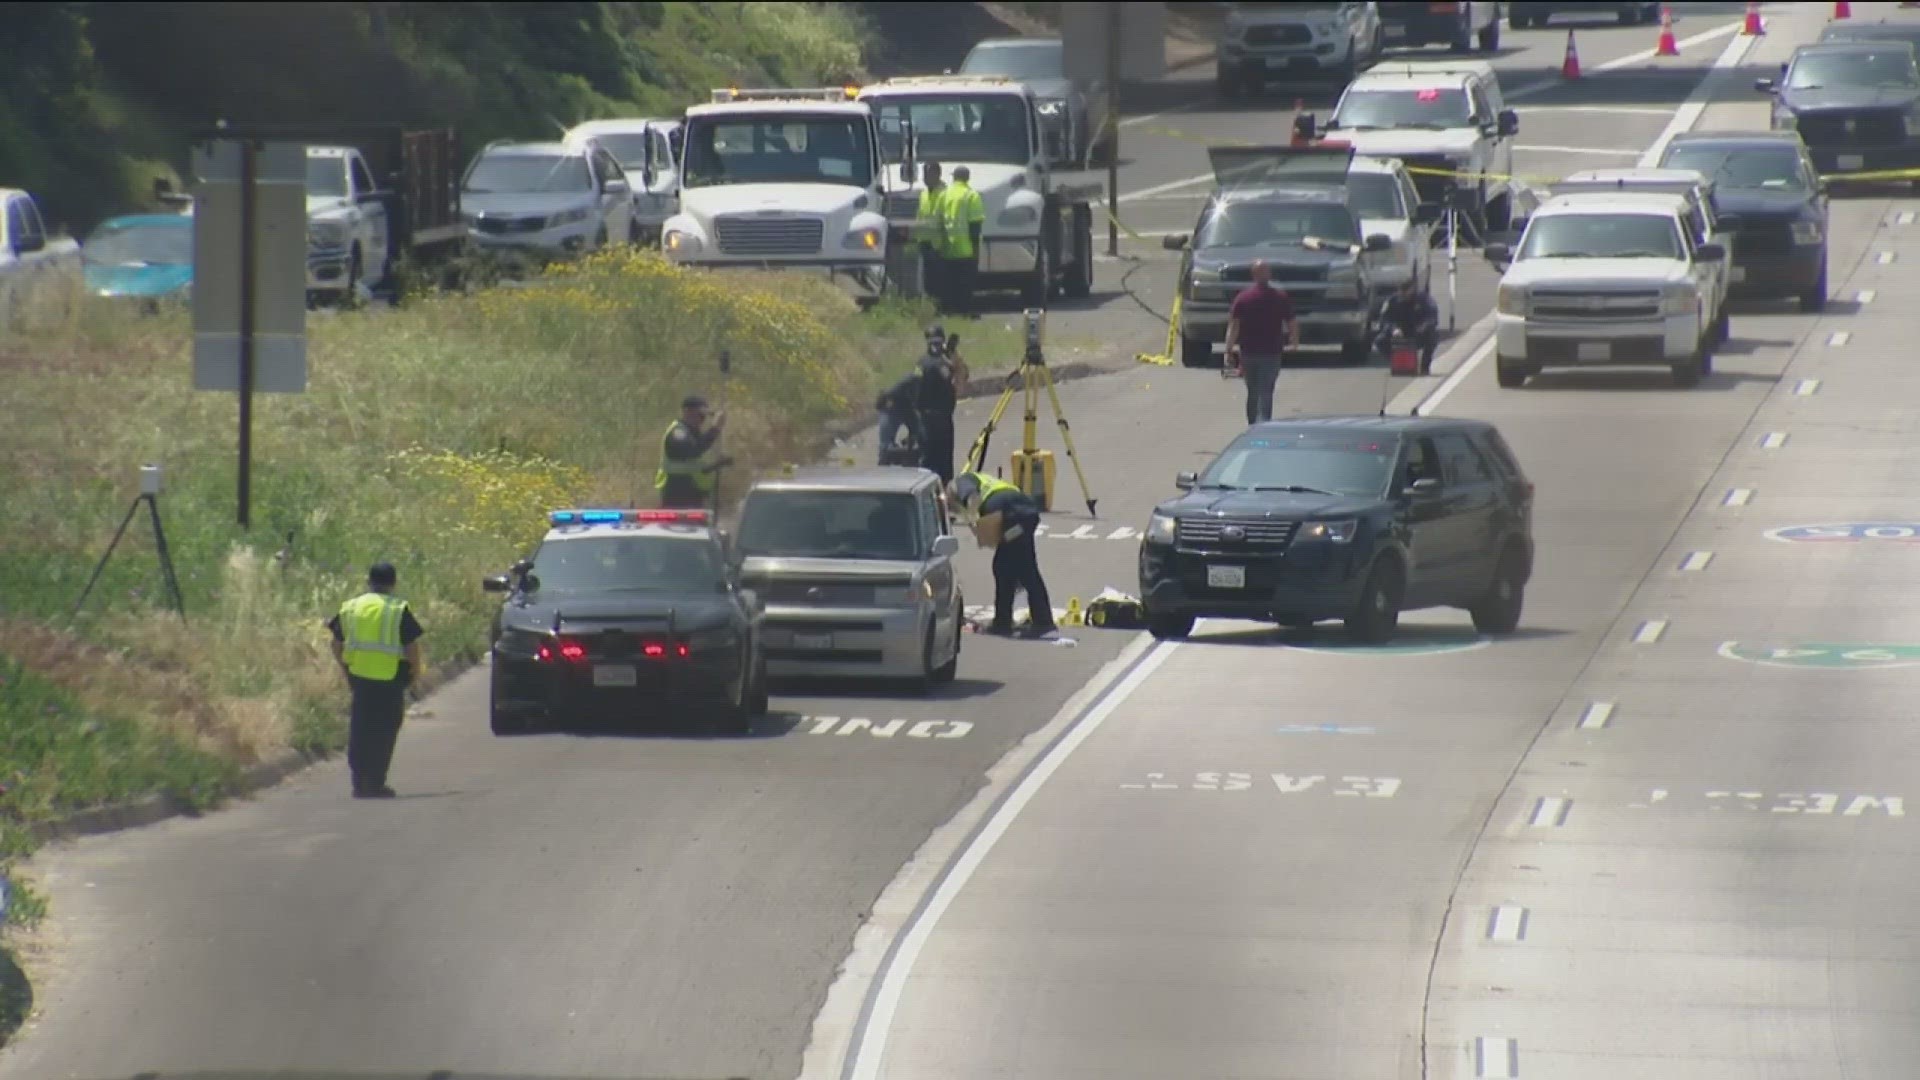 CHP-involved shooting prompts the closure of Interstate 805 through Lincoln Park.